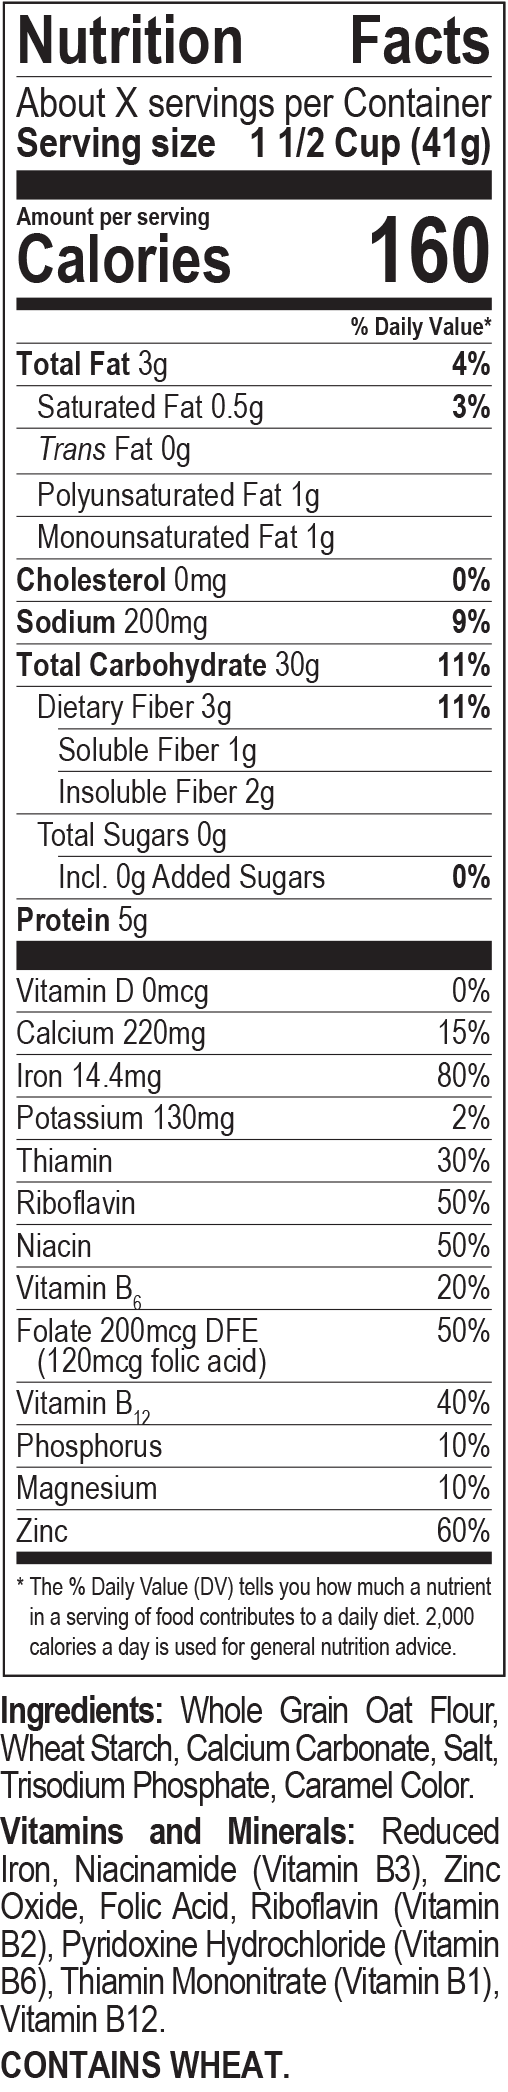 Scooters nutrition facts panel